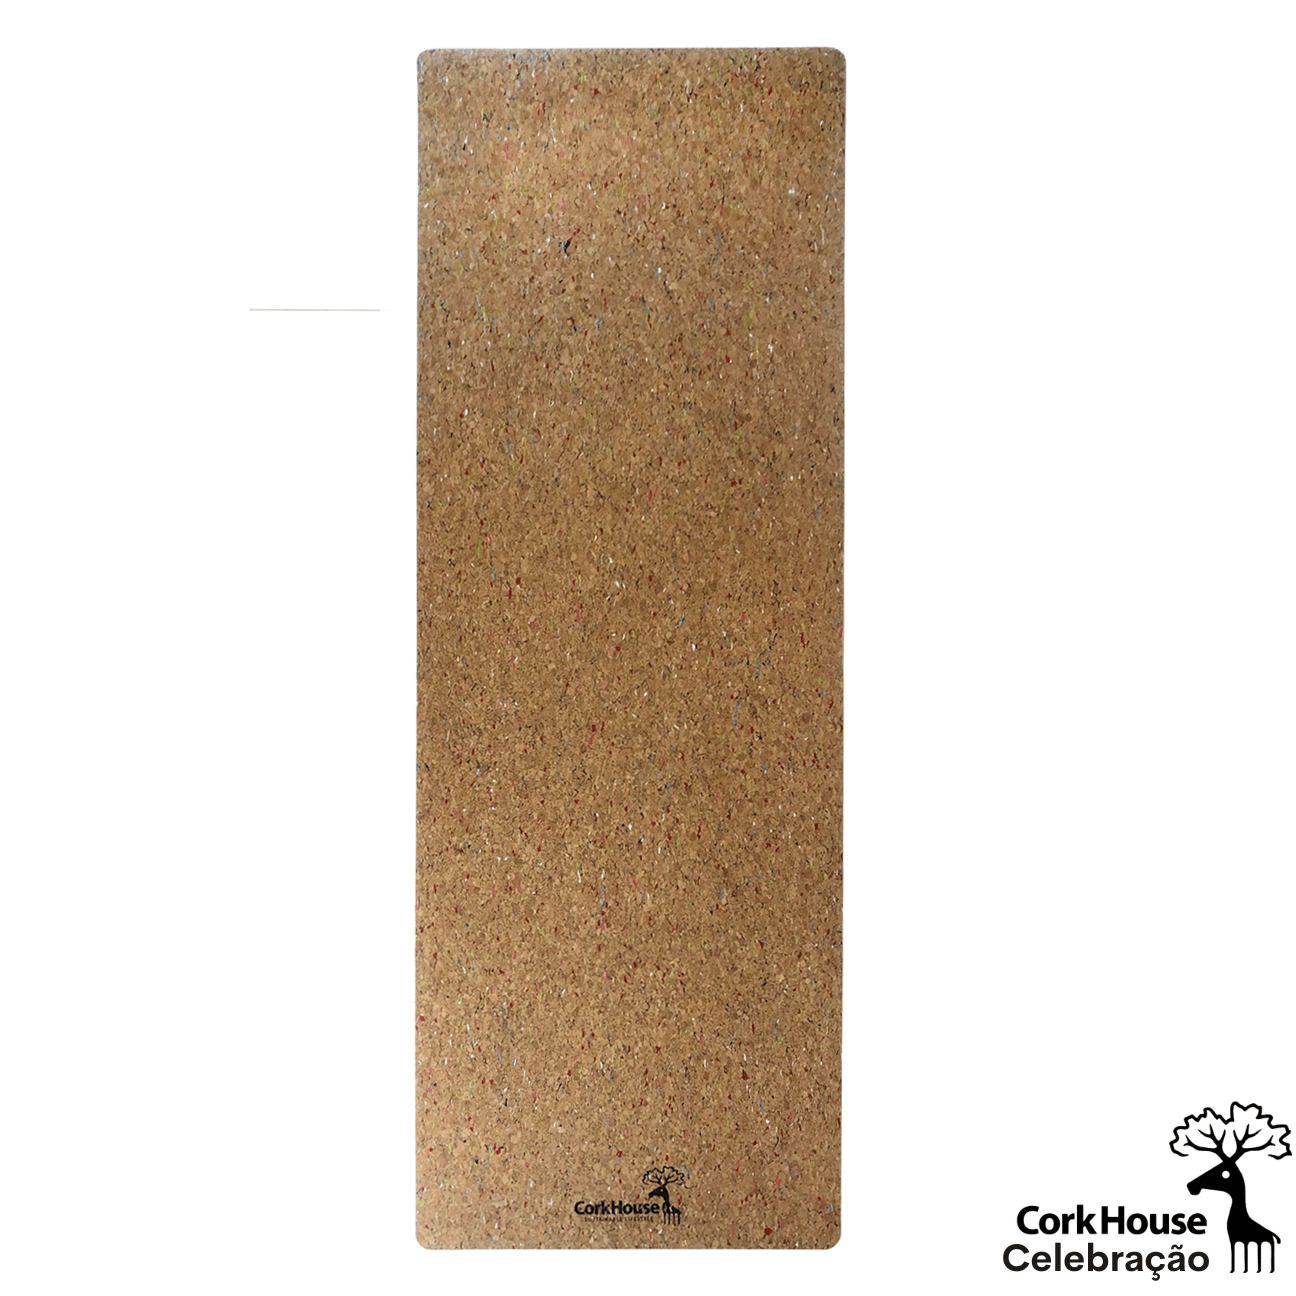 Cathe Lay-Flat Premium Natural Cork Extra Thick Exercise and Yoga Mat